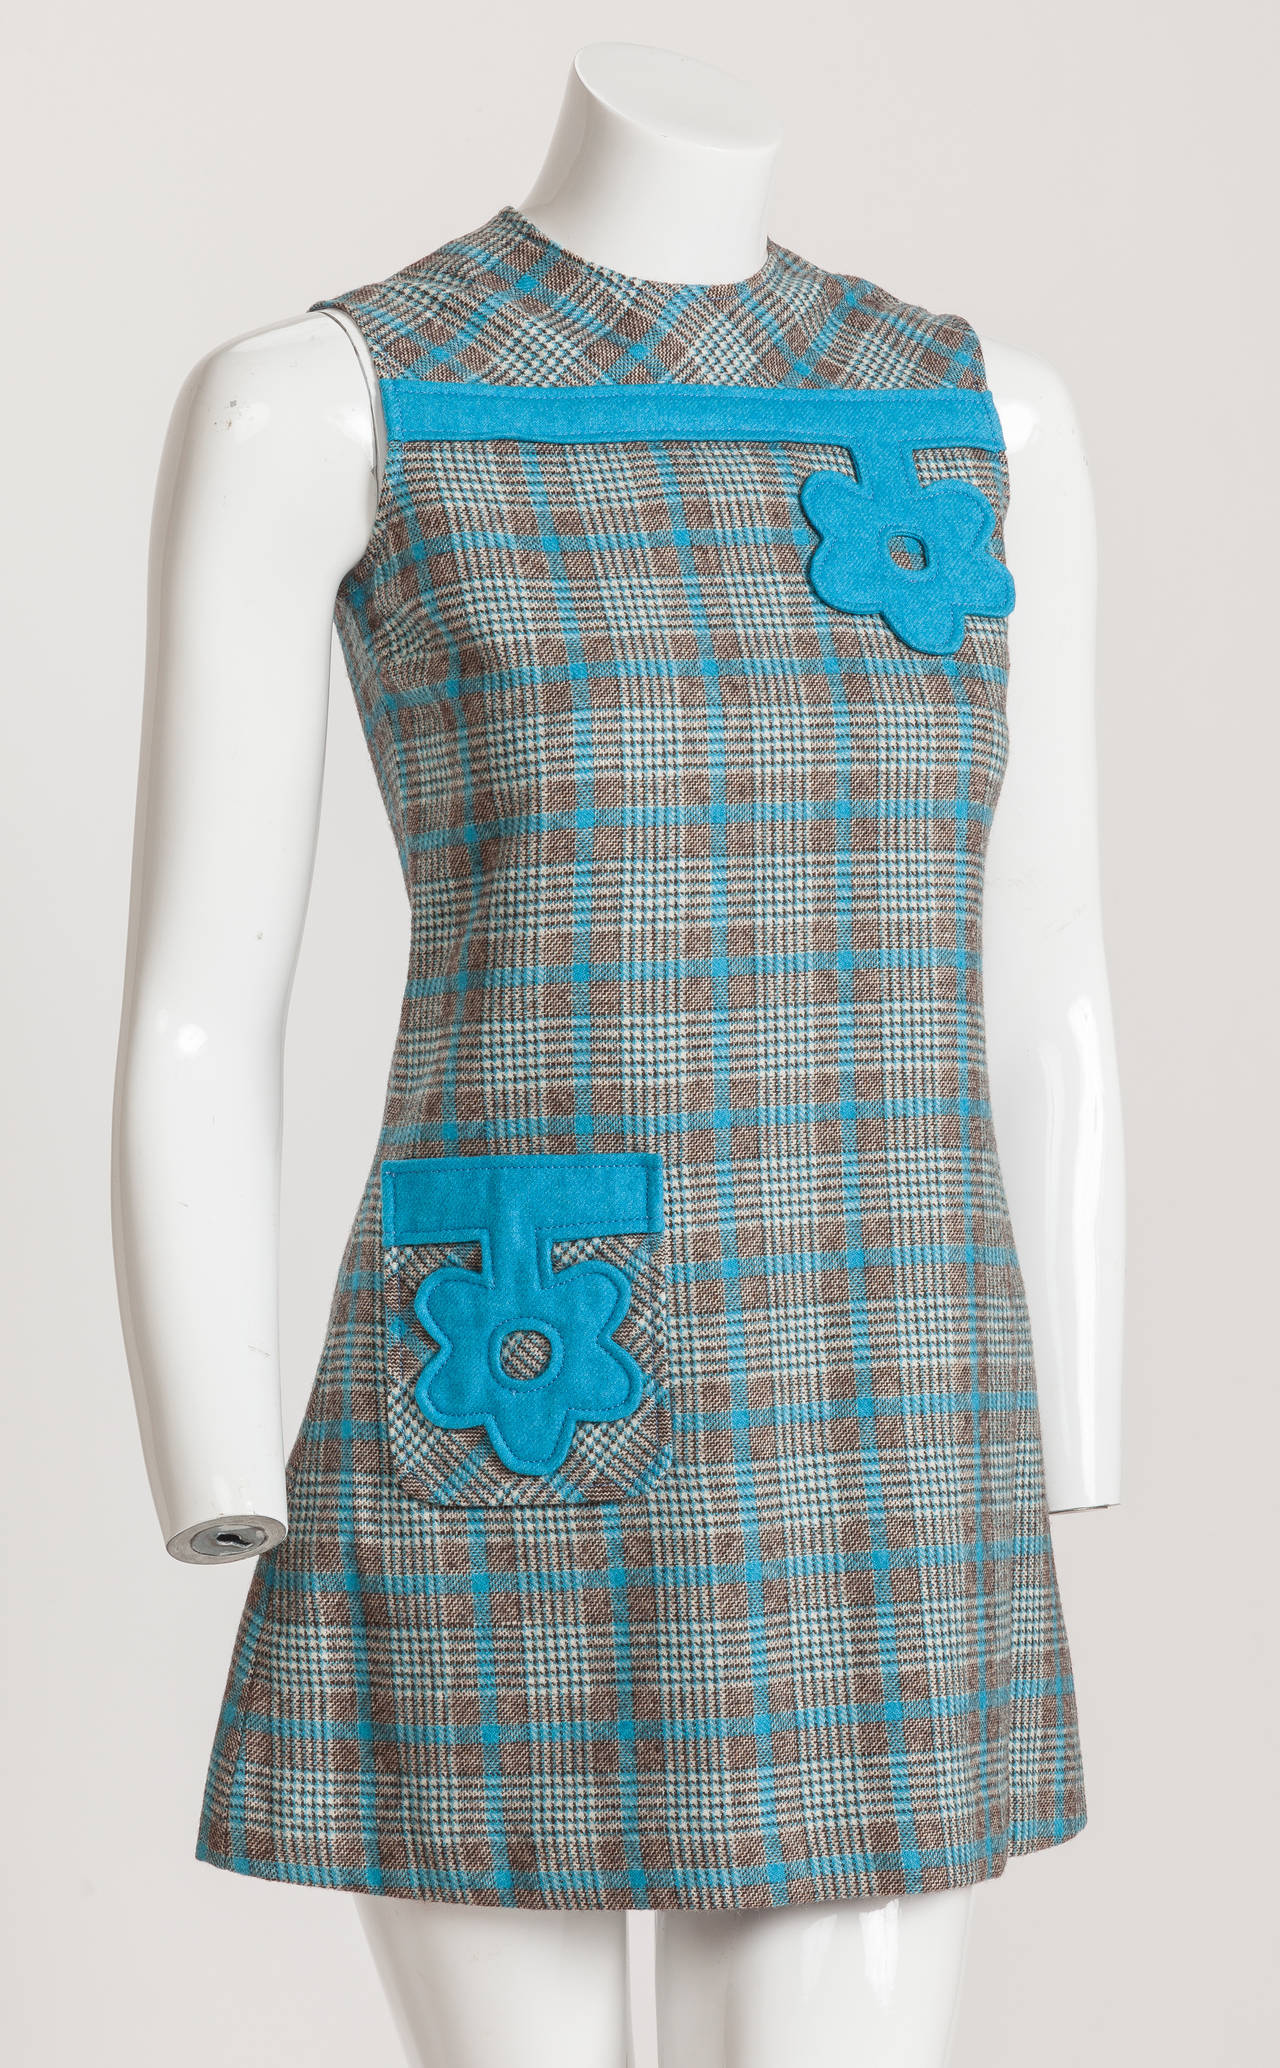 A Pierre Cardin sleeveless blue, brown and creme plaid wool mini dress lined with light purple Pierre Cardin signature fabric. Most likely from the 1970s, this tiny mod mini dress is appliquéd with two oversize teal blue felt flower and bar designs